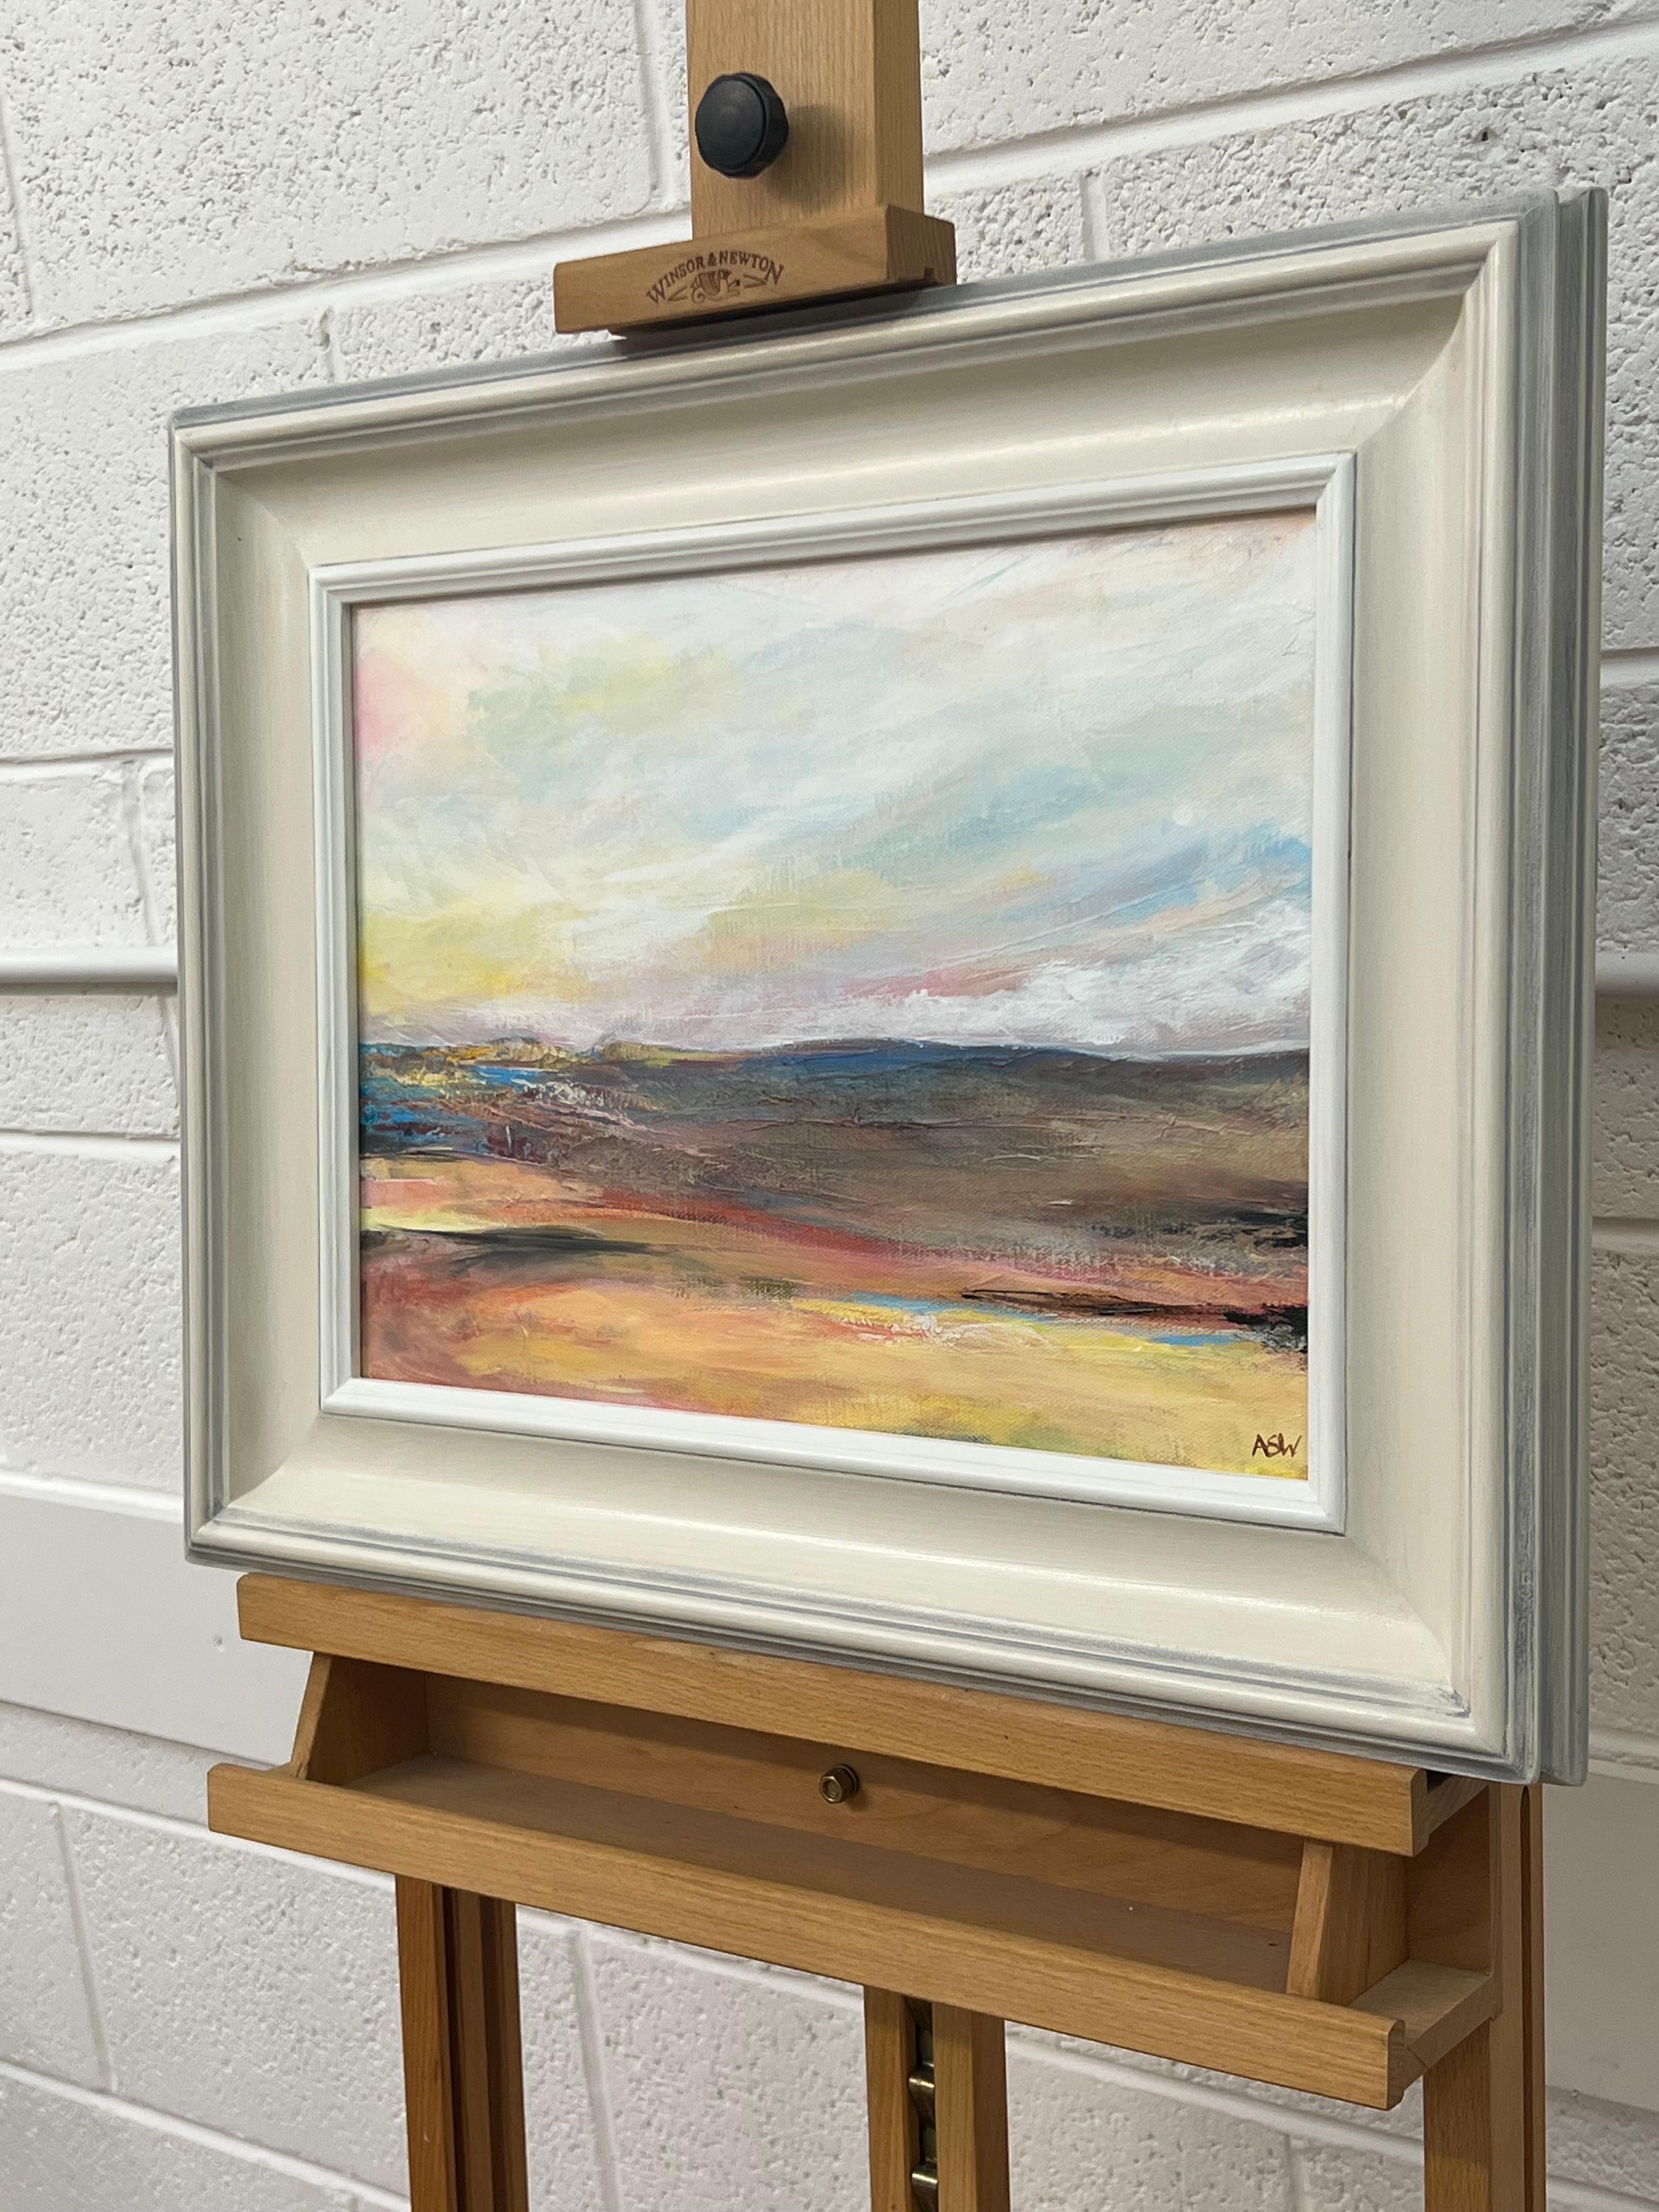 Impressionist Abstract Landscape of English Moorland by Contemporary British Artist, Angela Wakefield. Entitled 'Serenity #05', this atmospheric painting depicts an imagined desolate moorland scene using muted pastel colours. This unique original